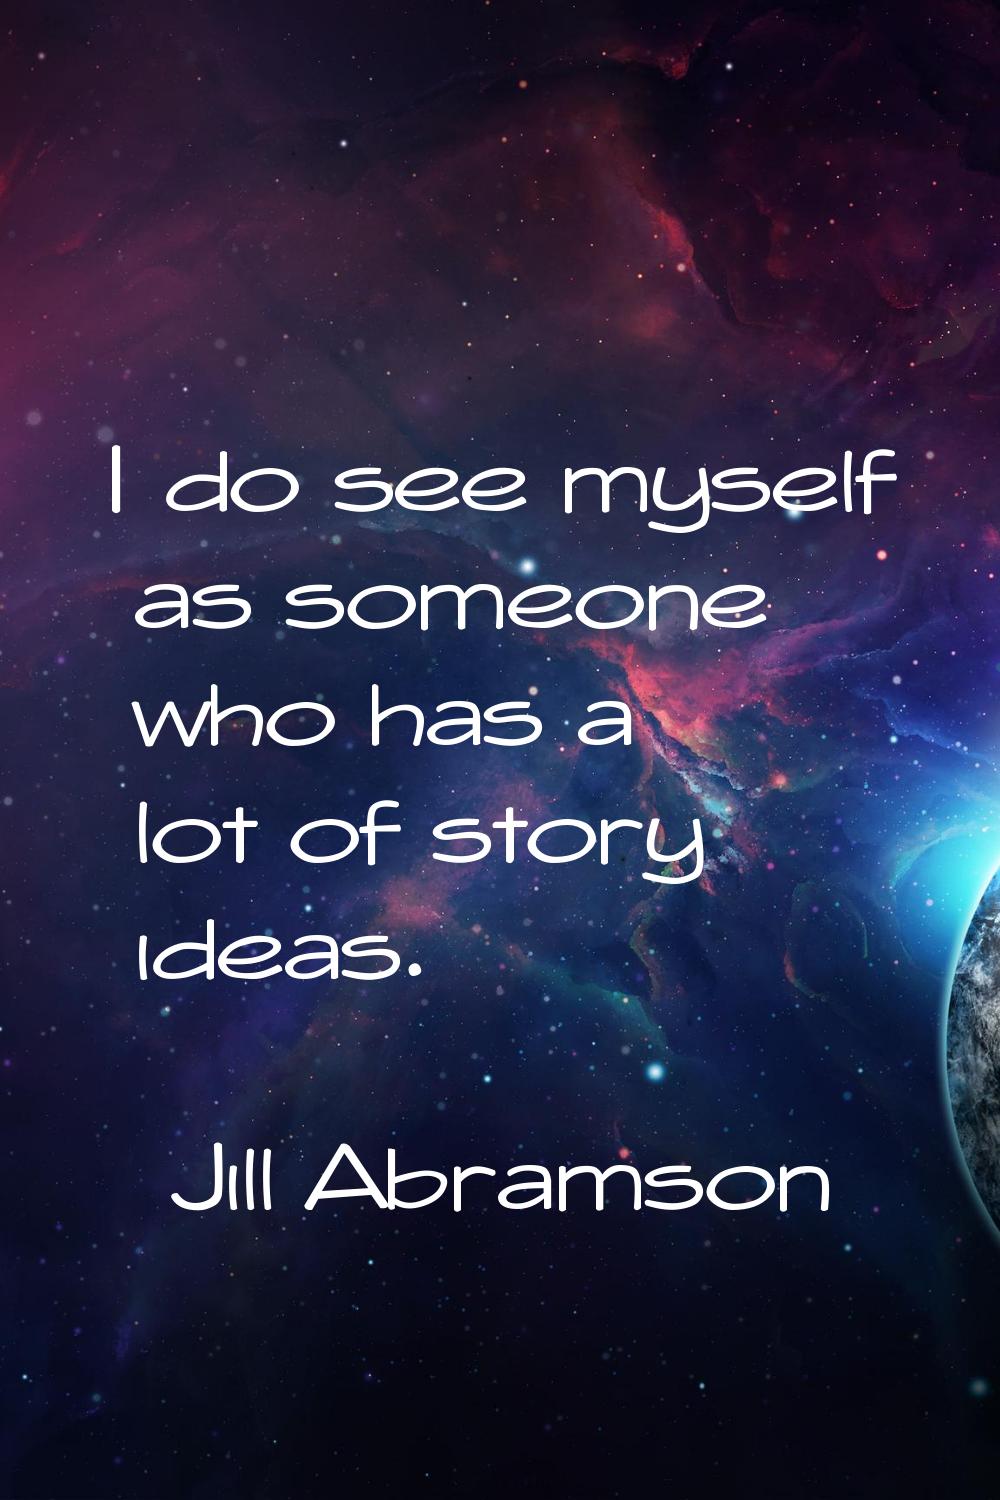 I do see myself as someone who has a lot of story ideas.